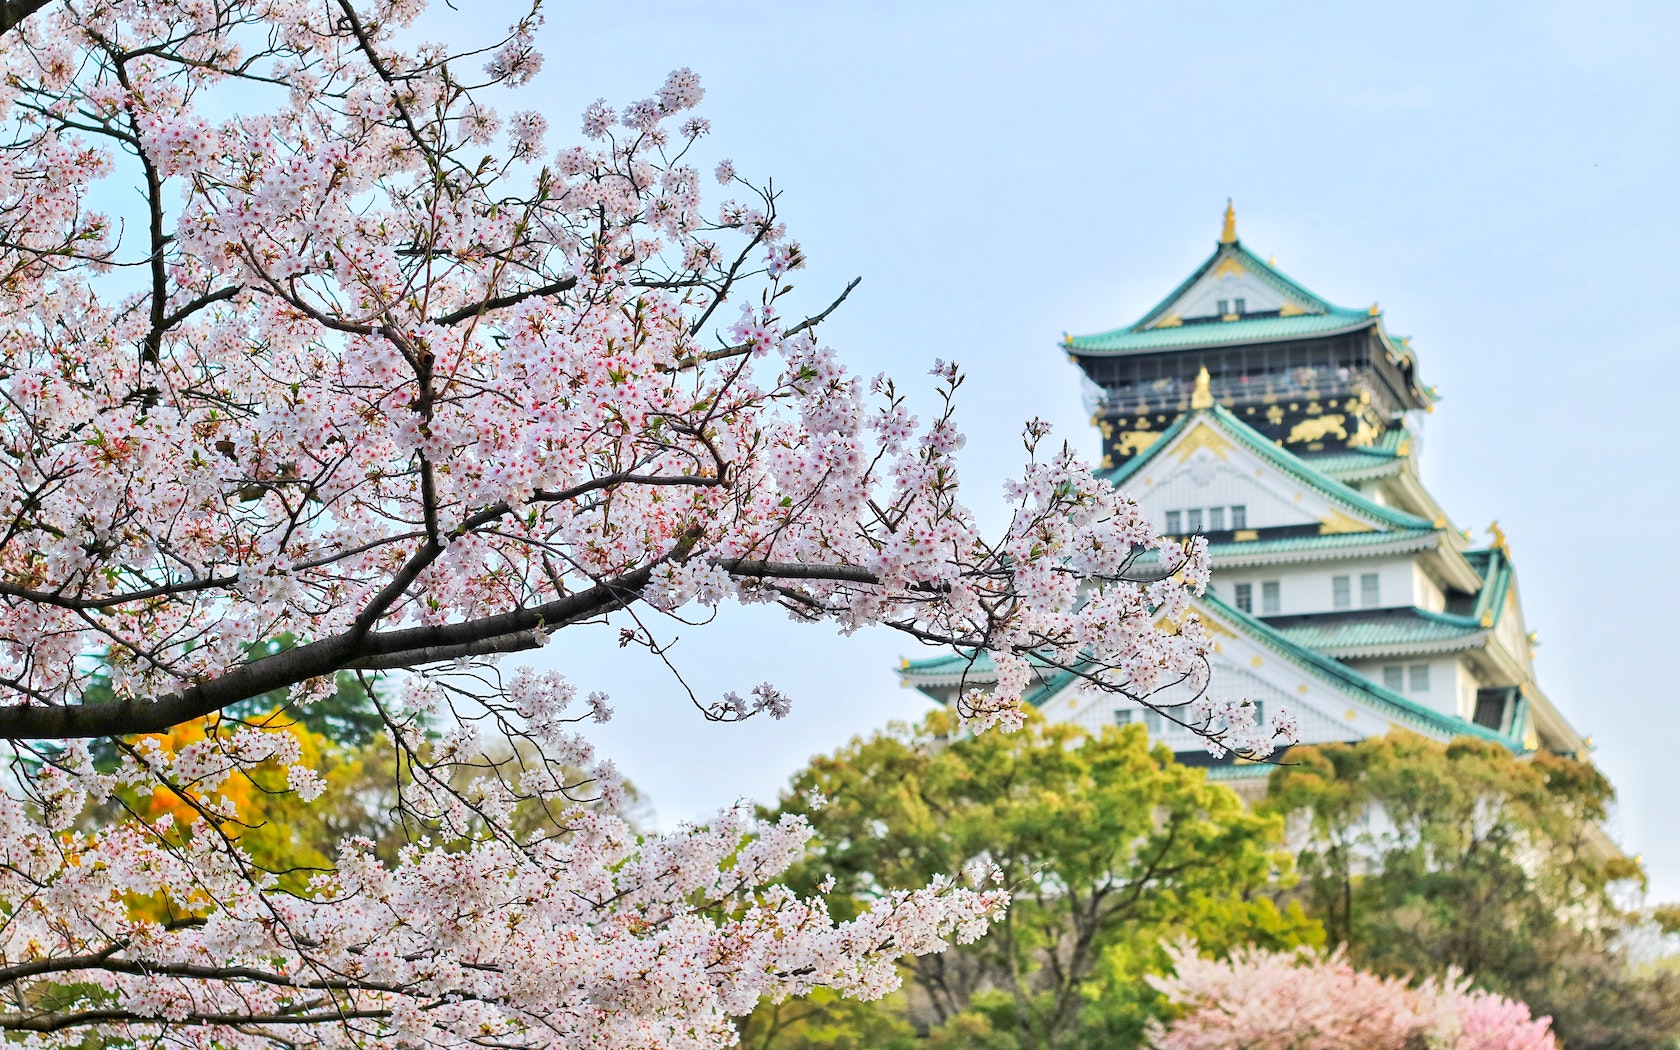 The cherry blossom forecast predicts when sakura trees will bloom in Japan